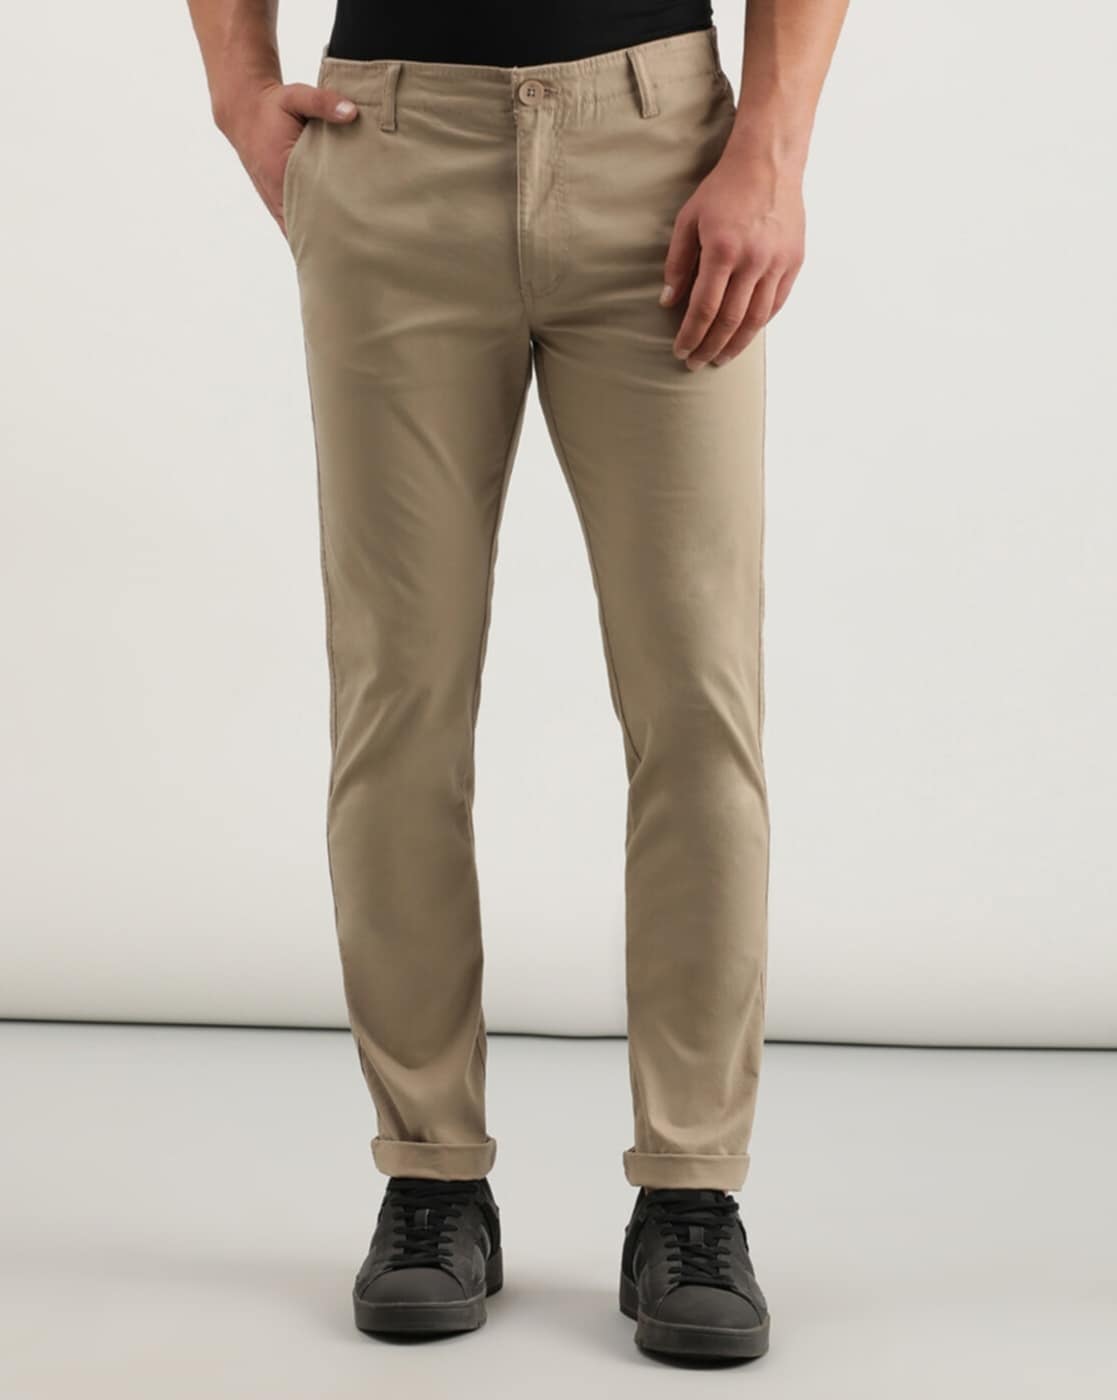 Lee Men Beige Straight Loose Chino Stretch Jeans W30 L32 | Fabb Fashion